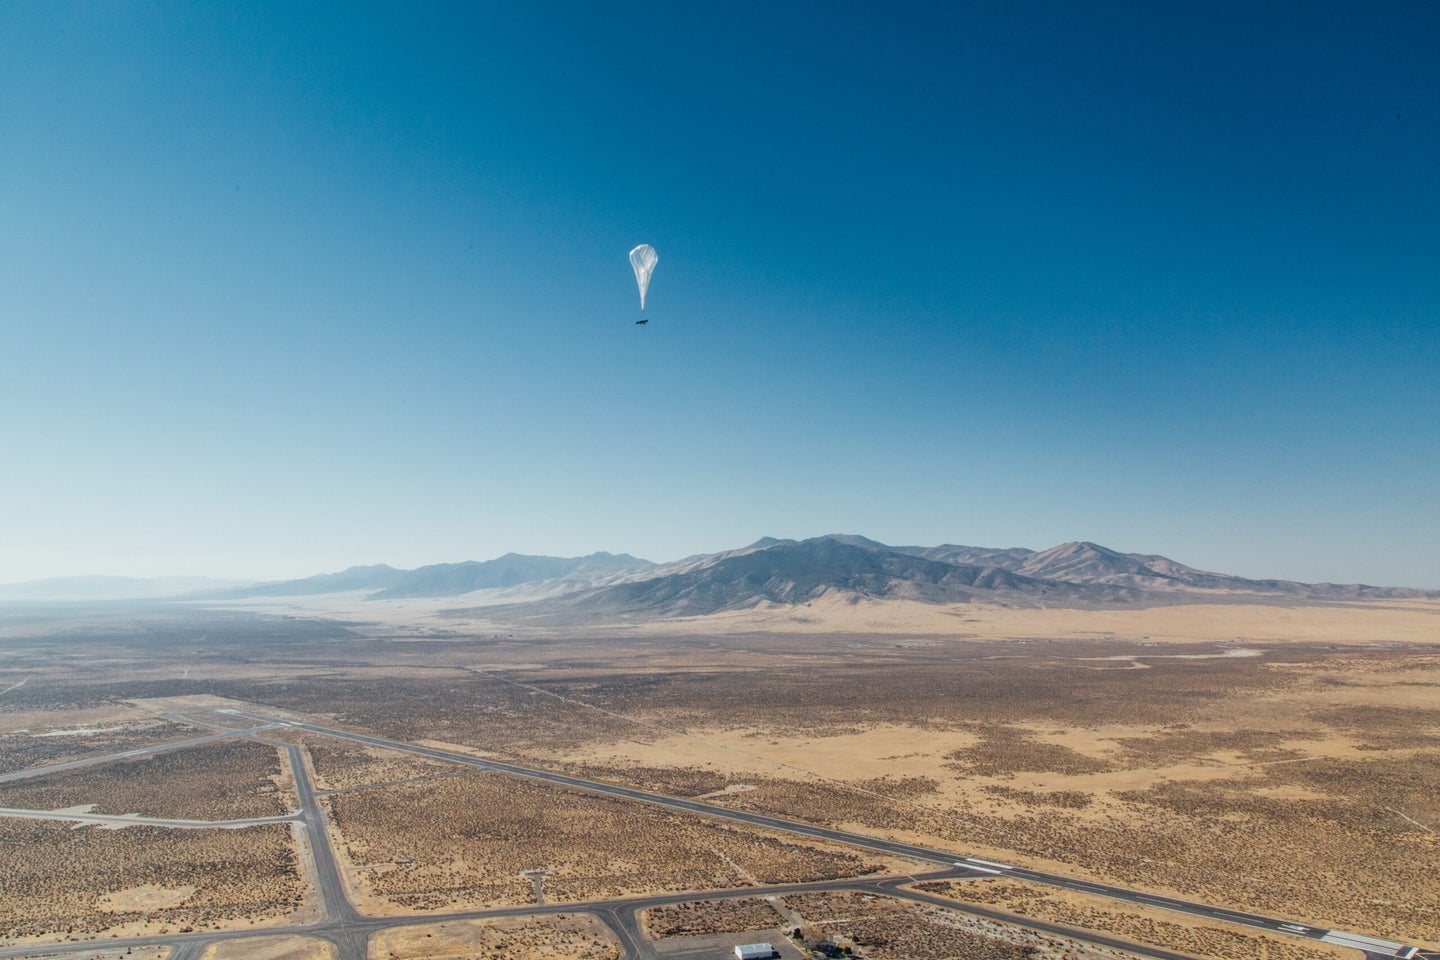 Sending wireless data 372 miles between two balloons takes really good aim